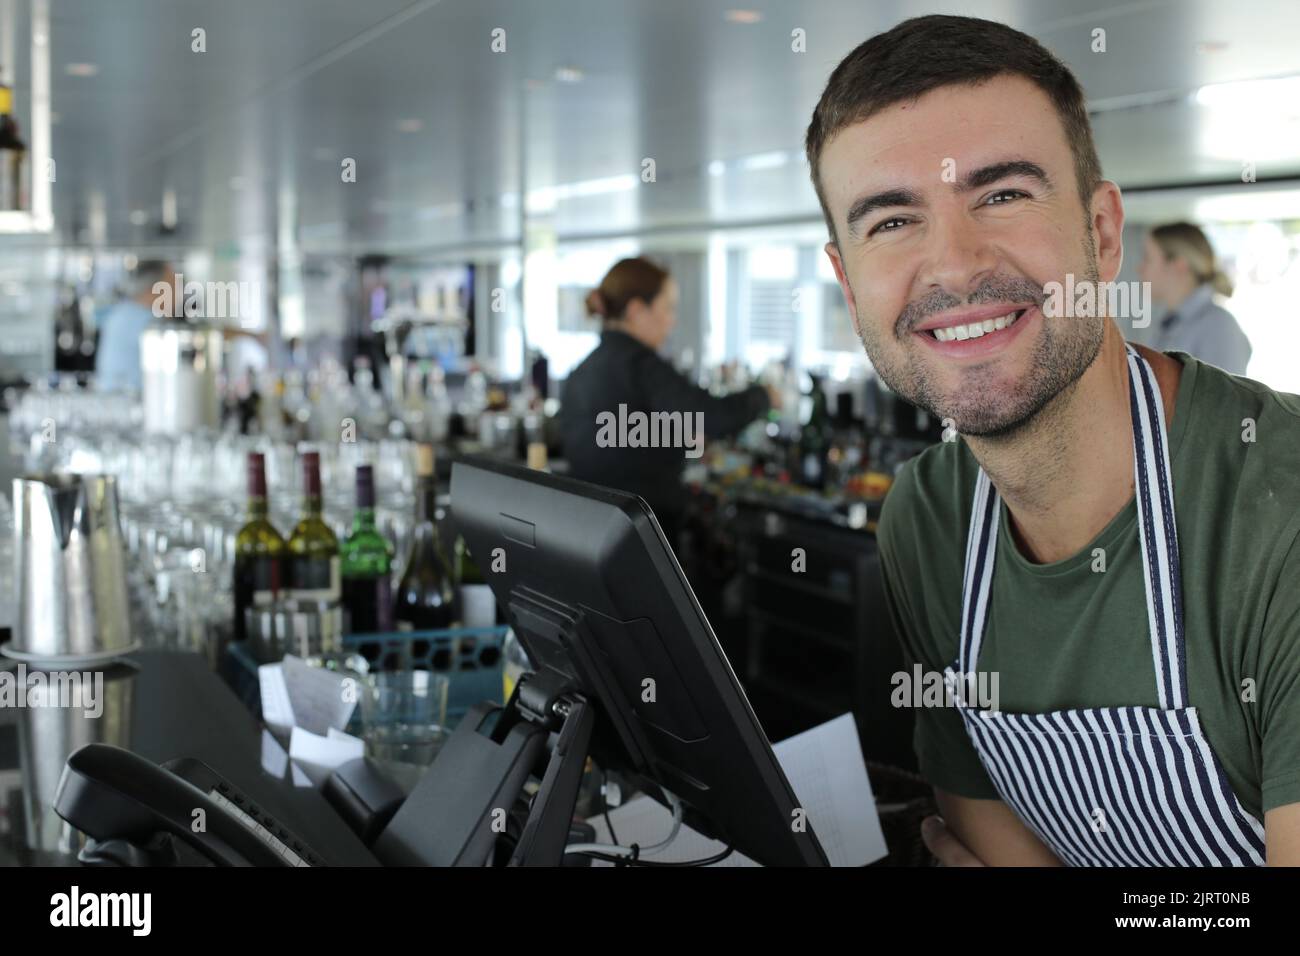 Restaurant cashier in front of computer Stock Photo